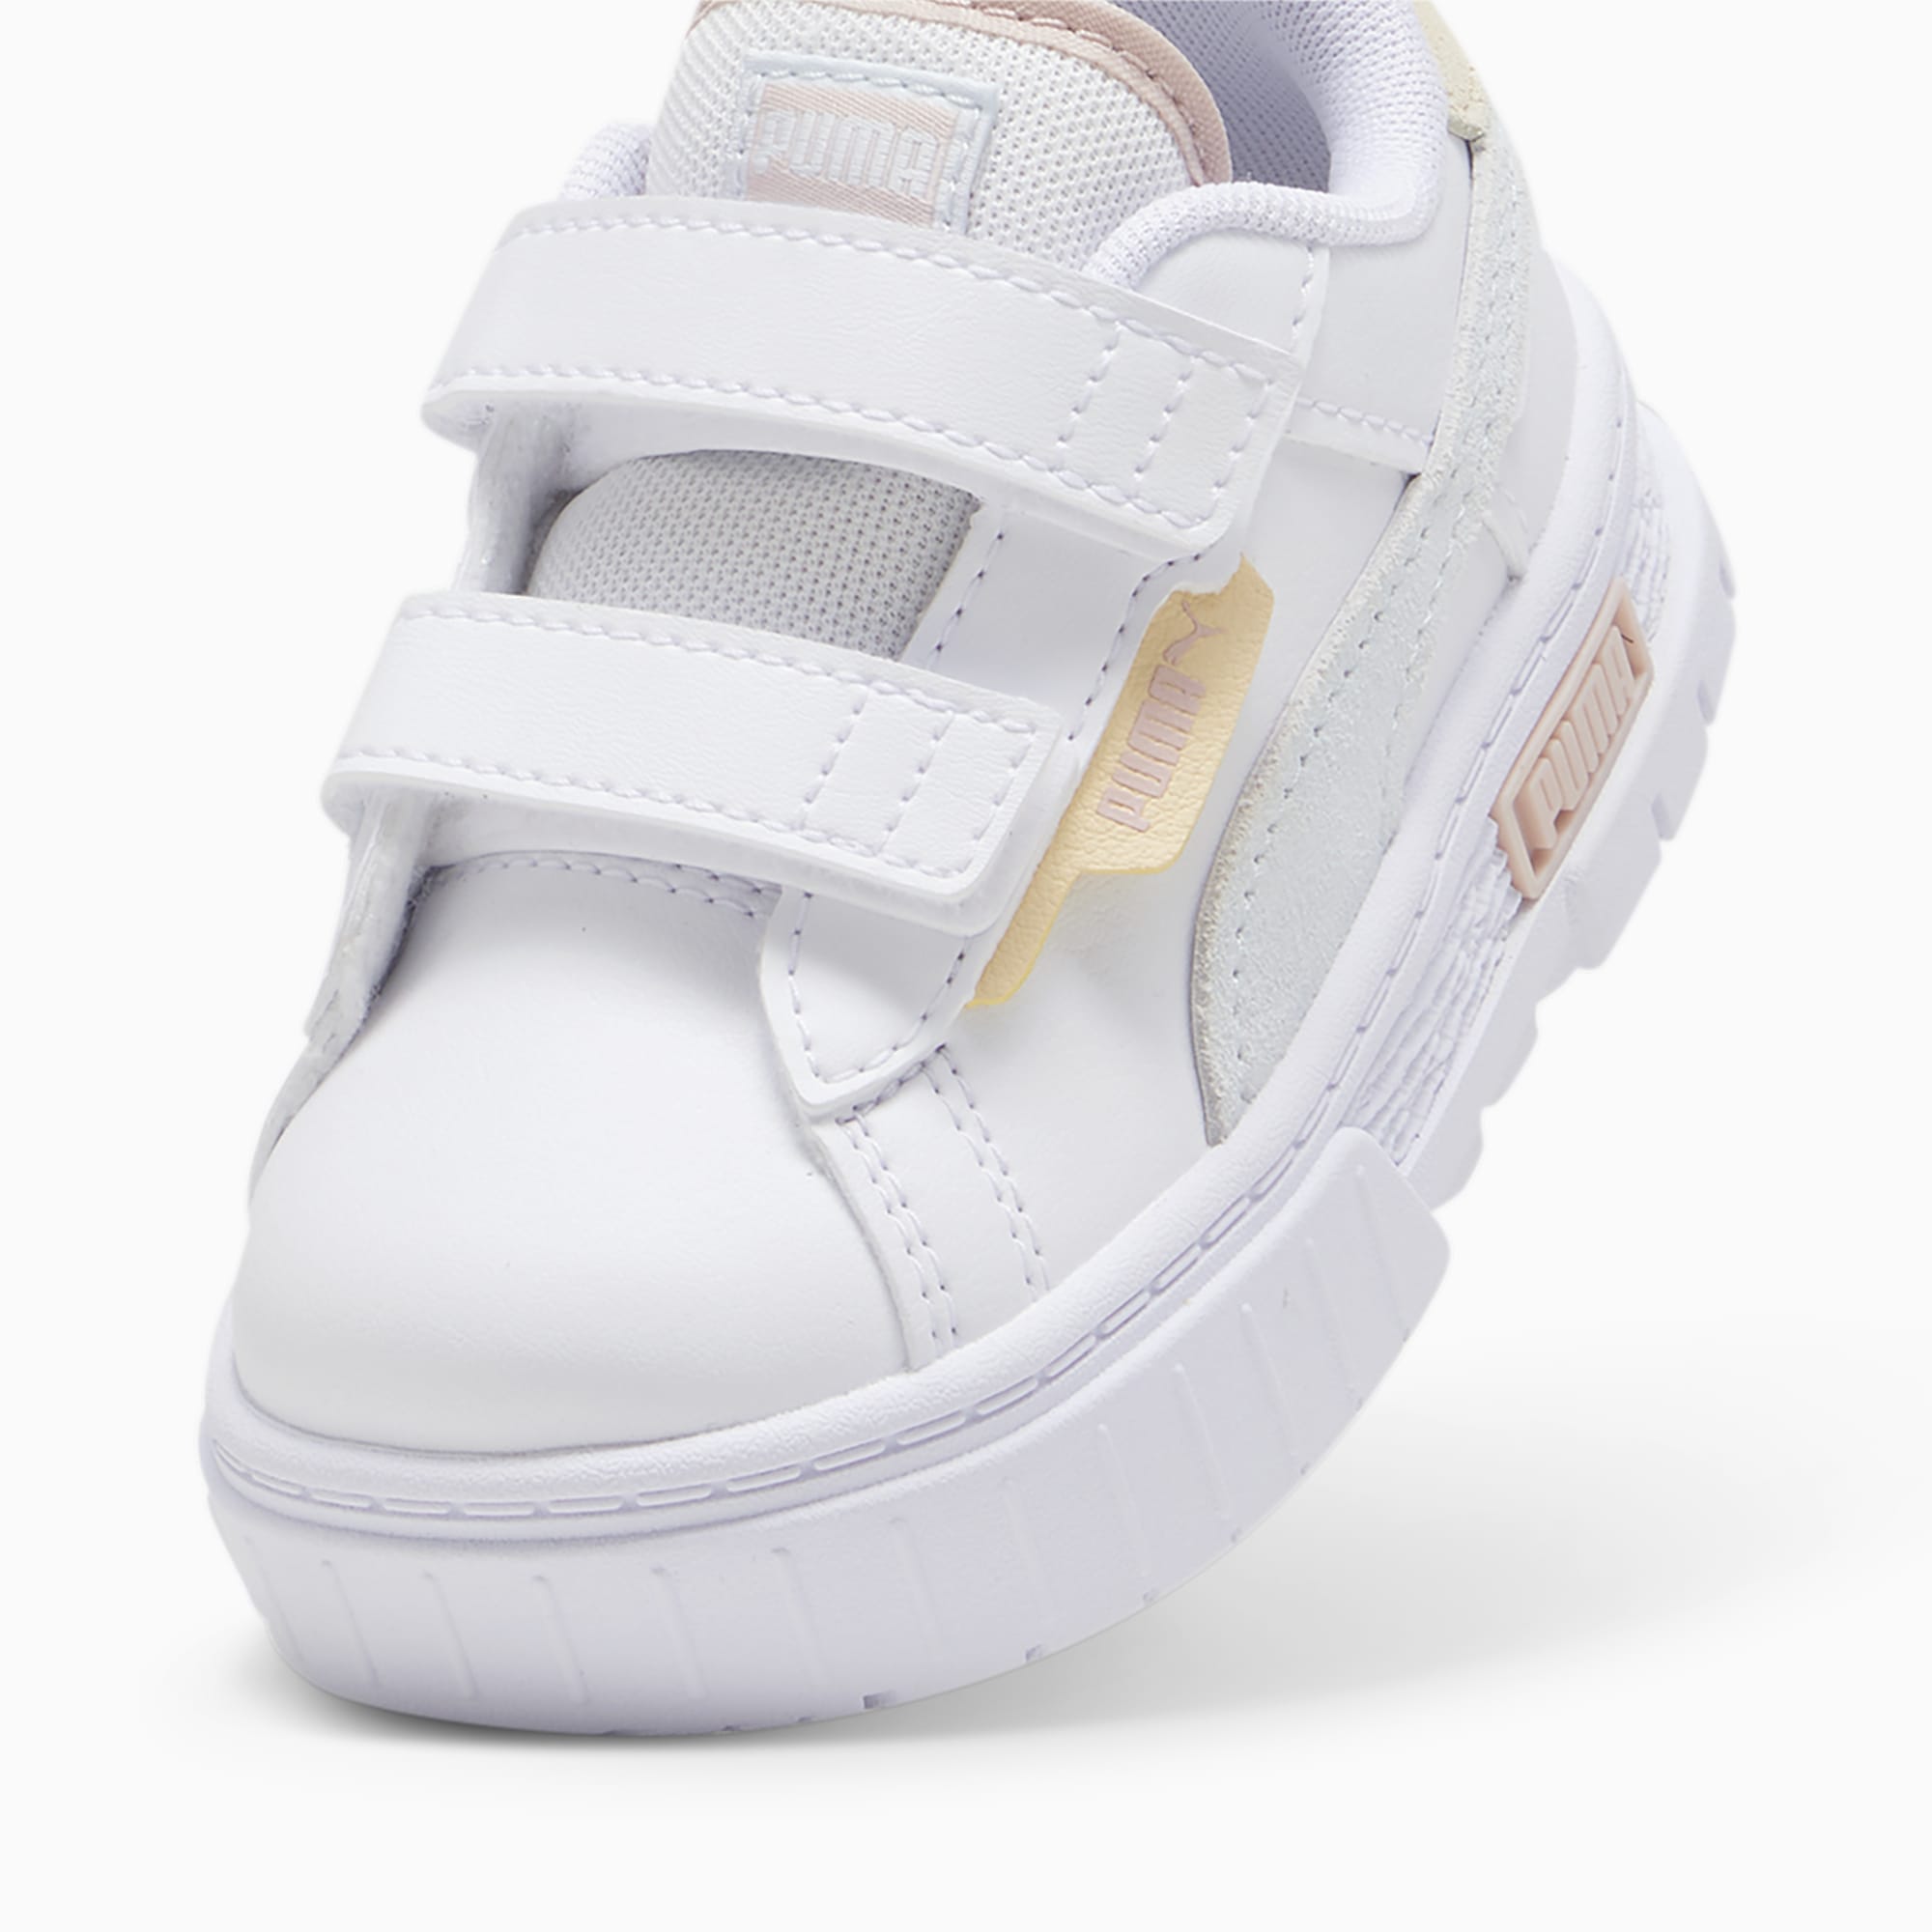 PUMA Mayze Crashed Toddlers' Sneakers, White/Dewdrop, Size 21, Shoes